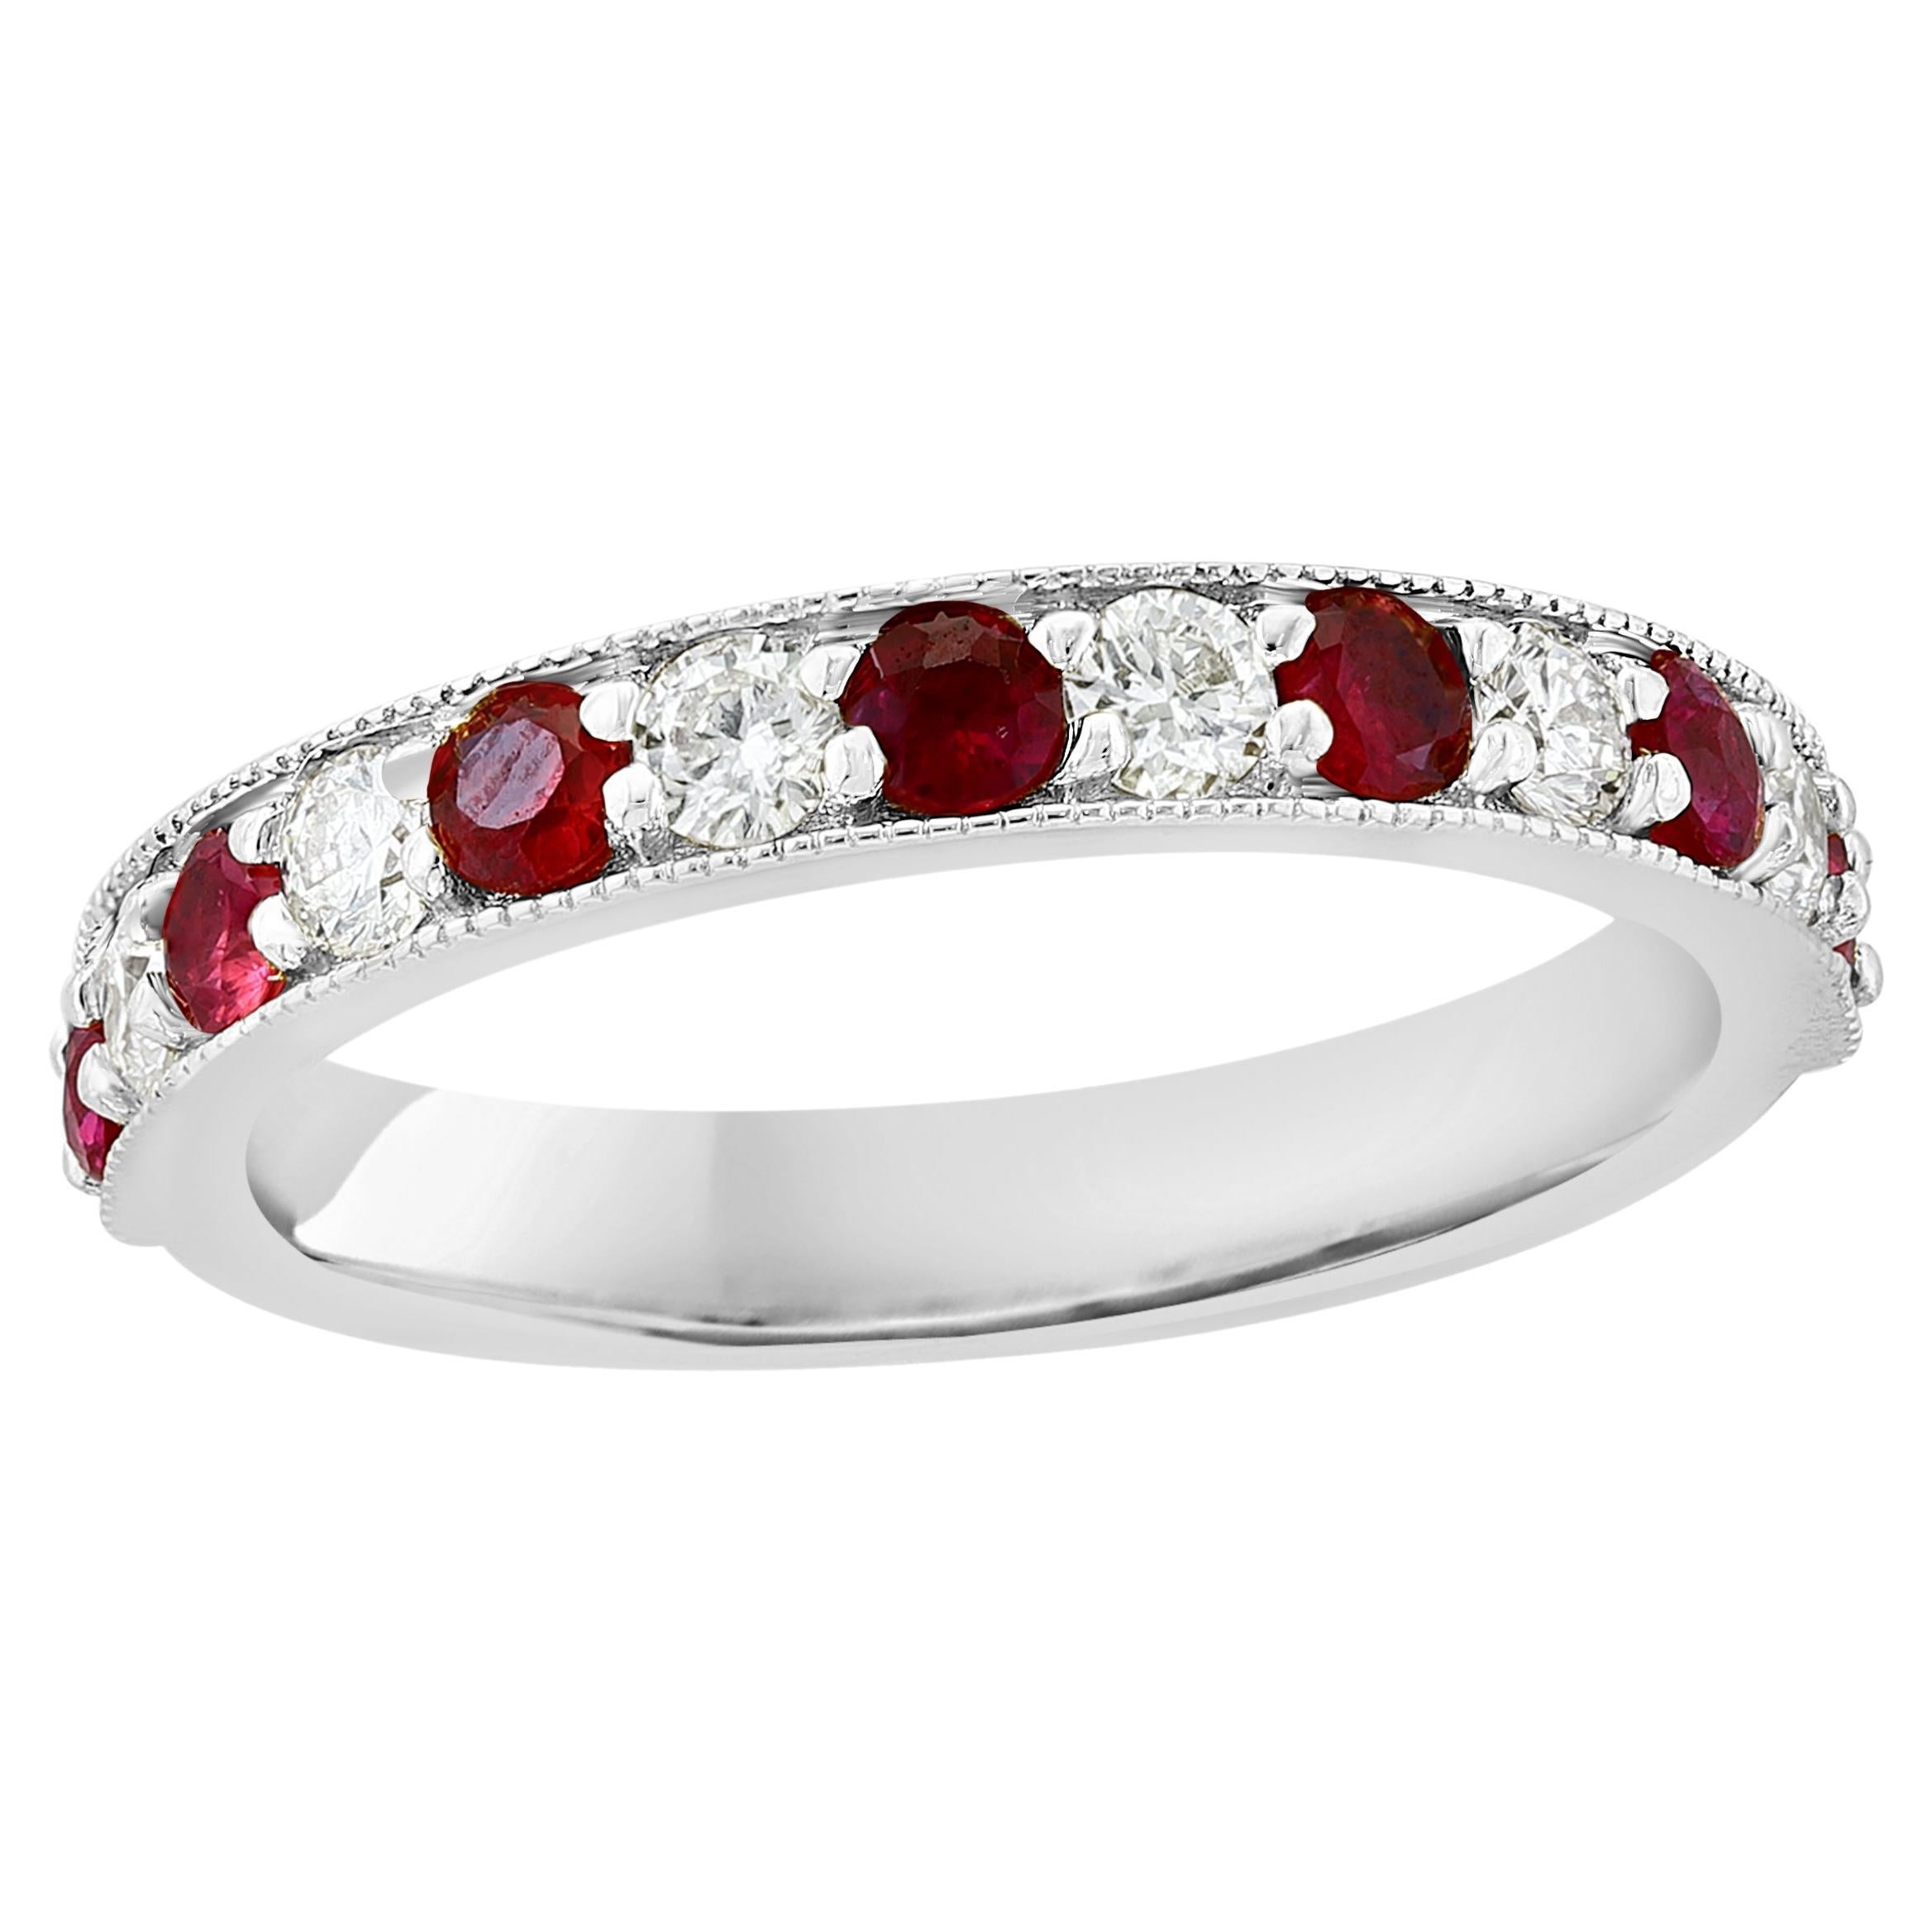 0.62 Carat Brilliant Cut Ruby and Diamond Band in 14K White Gold For Sale